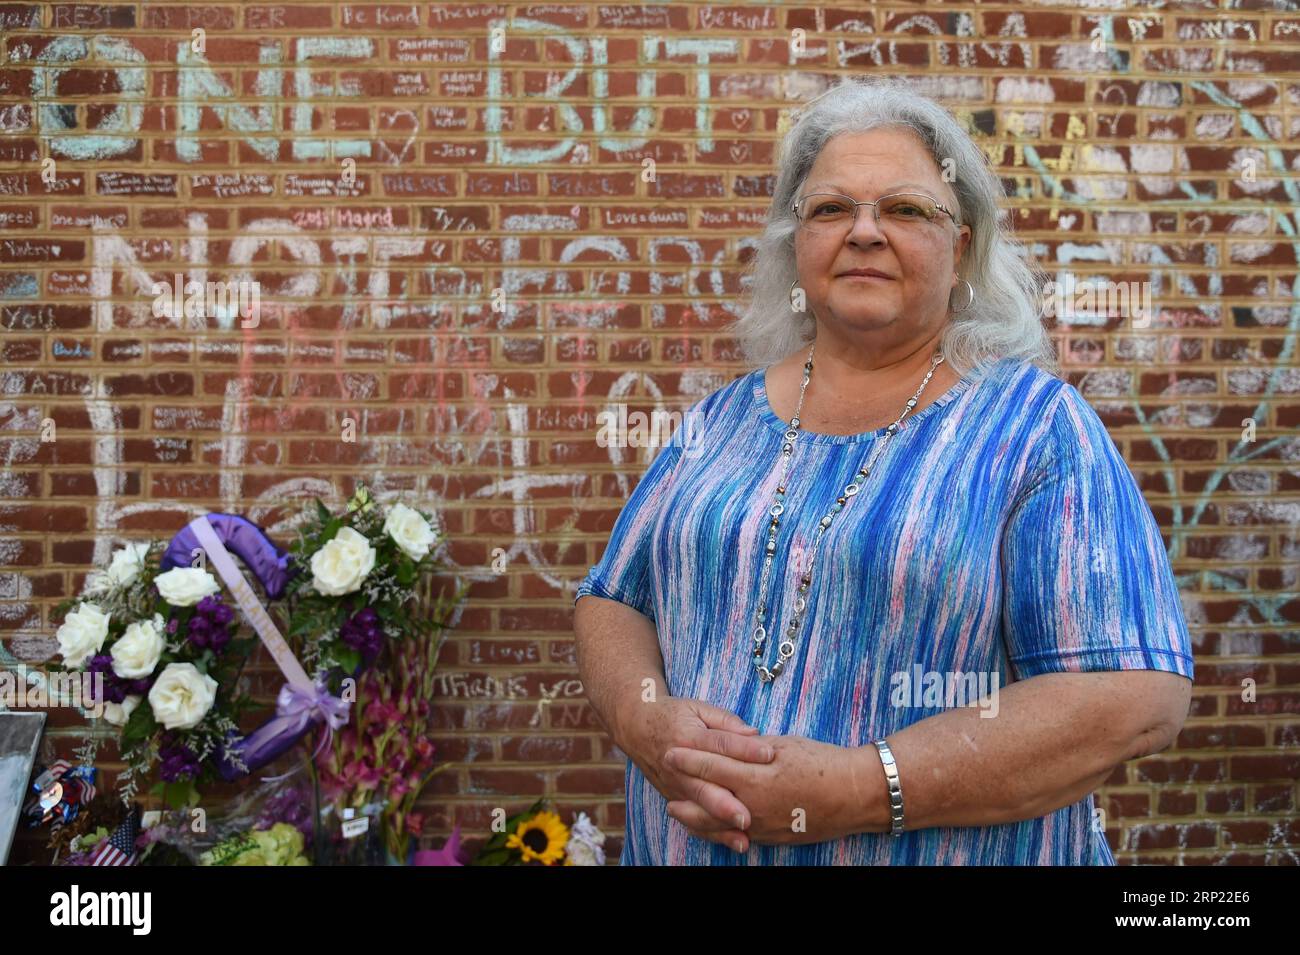 (180812) -- WASHINGTON, Aug. 12, 2018 -- Susan Bro, mother of Heather Heyer, is seen at the street corner where her daughter was killed in Charlottesville, Virginia, the United States, on Aug. 10, 2018. A year after a white nationalist rally traumatized Charlottesville, in the U.S. state of Virginia, with riots and blood, the city is still healing from the shock. On Aug. 12, 2017, white supremacists and members of other hate groups gathered in Charlottesville for a self-styled Unite the Right rally to protest against the city s decision to remove a Confederate statue before clashing violently Stock Photo